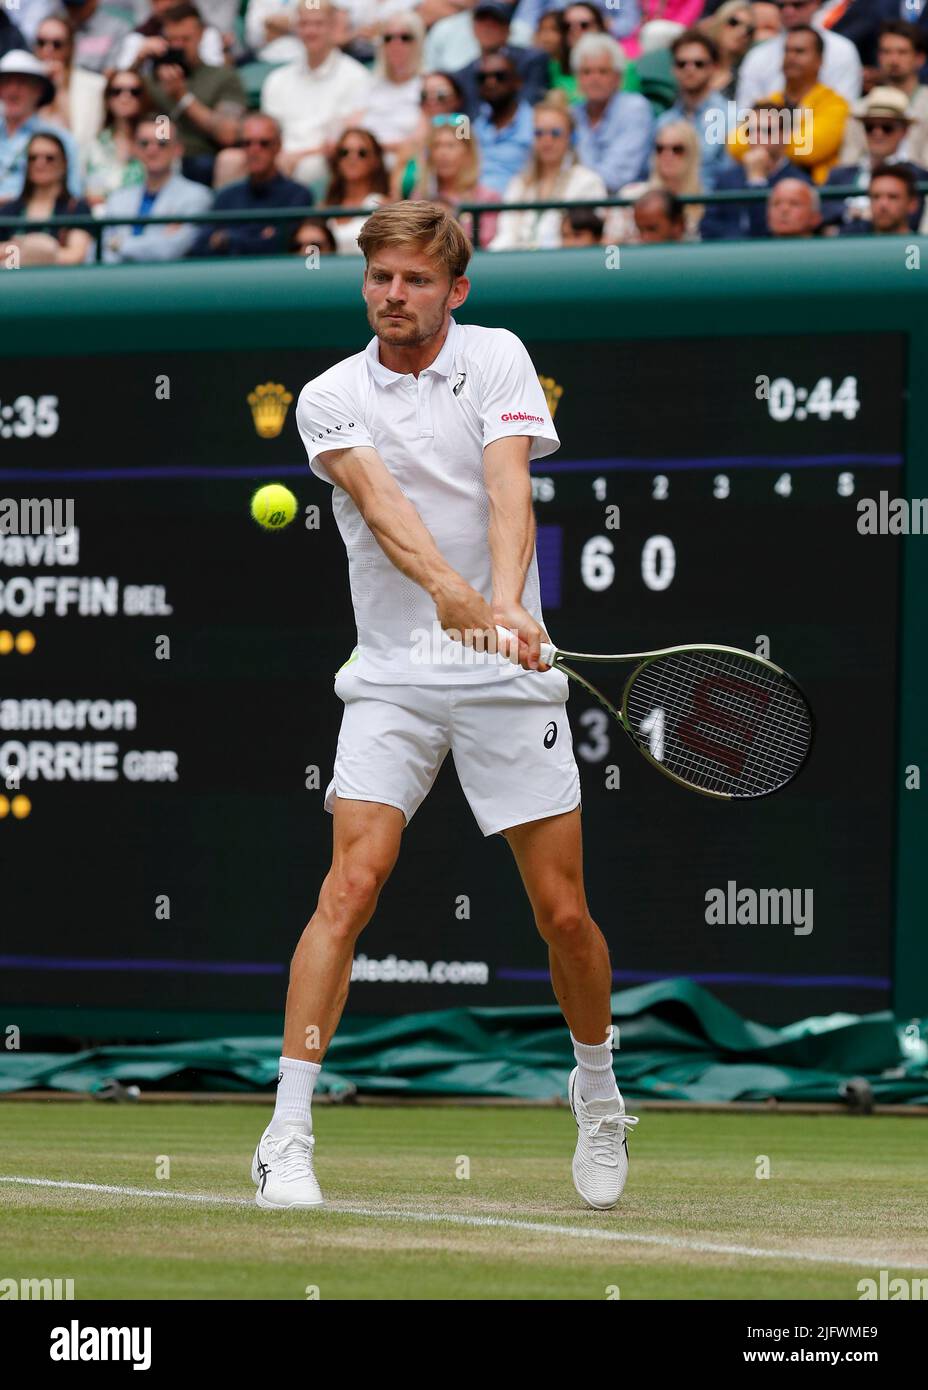 goffin norrie live